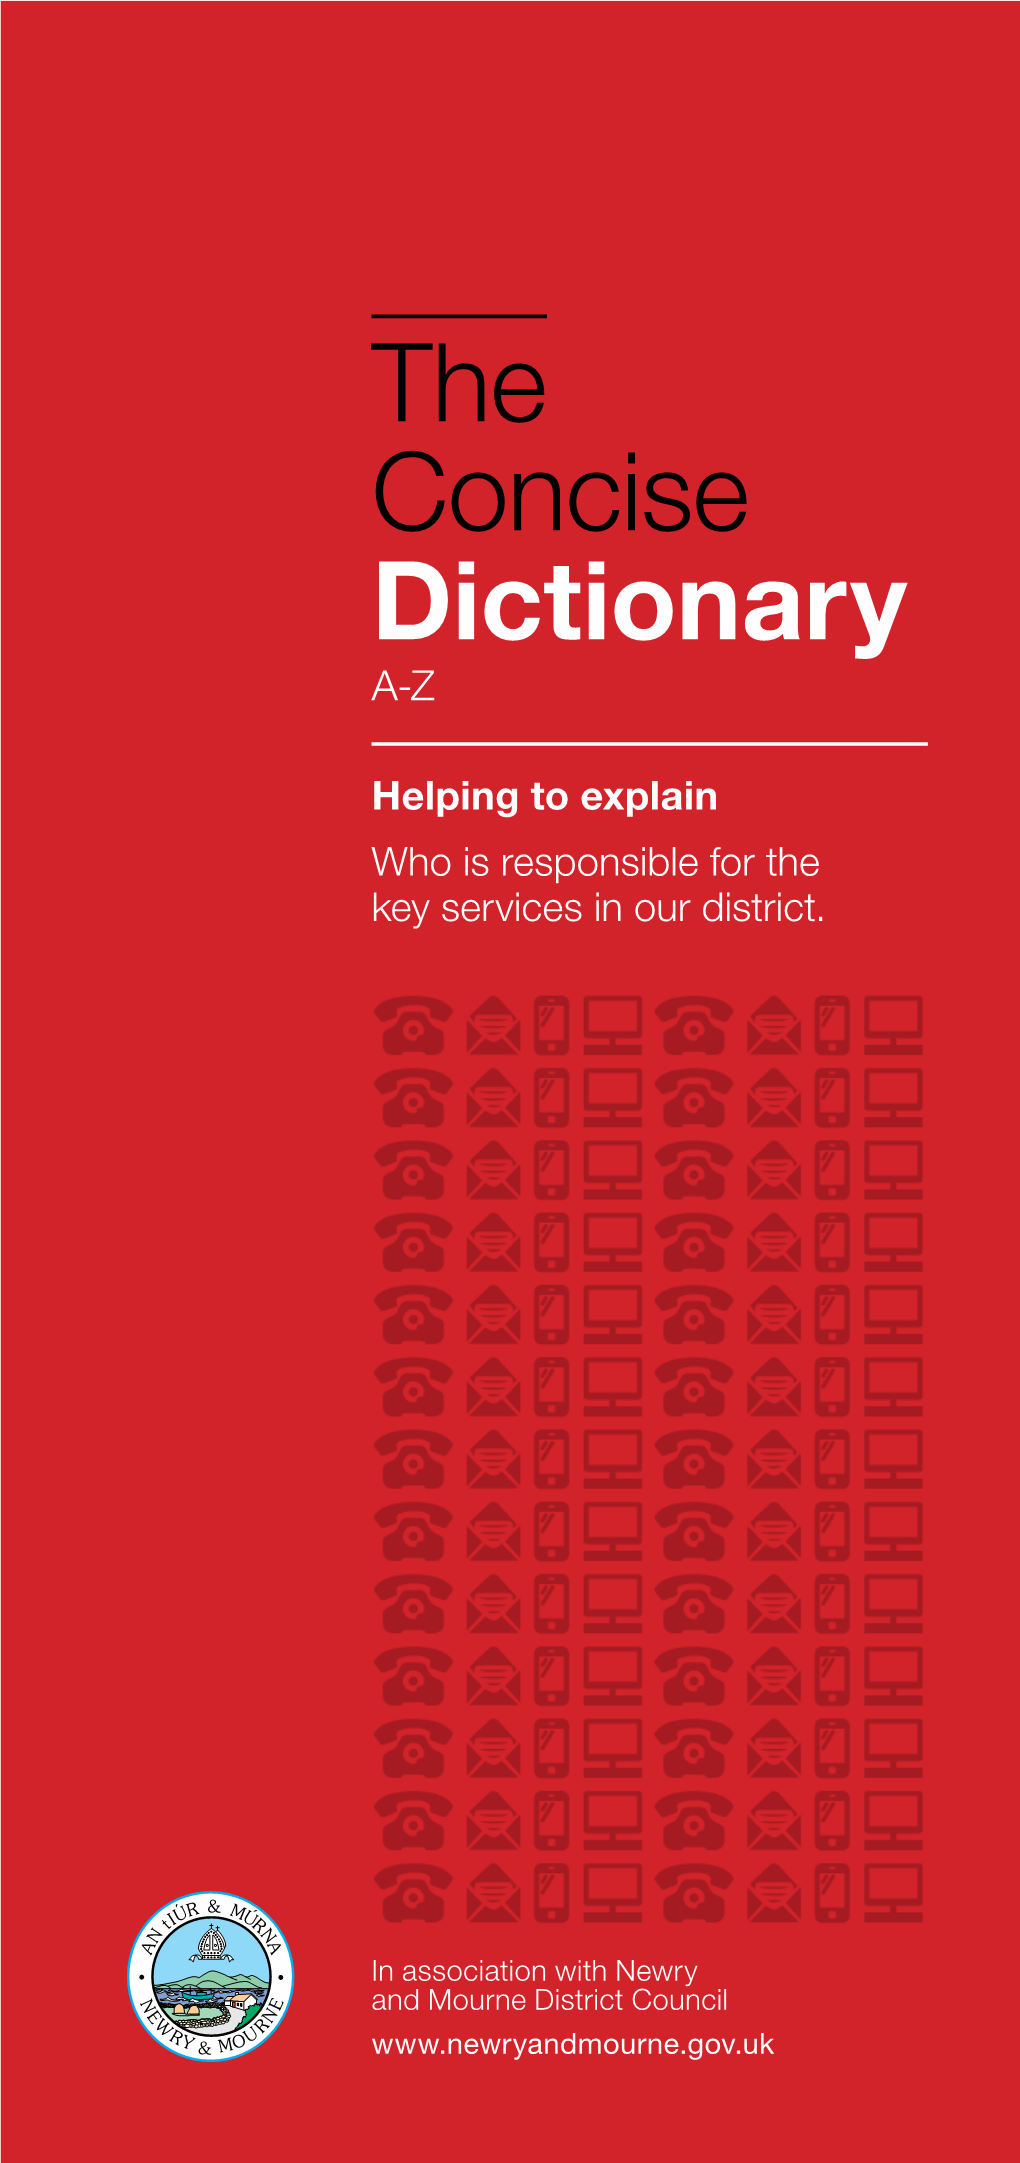 The Concise Dictionary A-Z